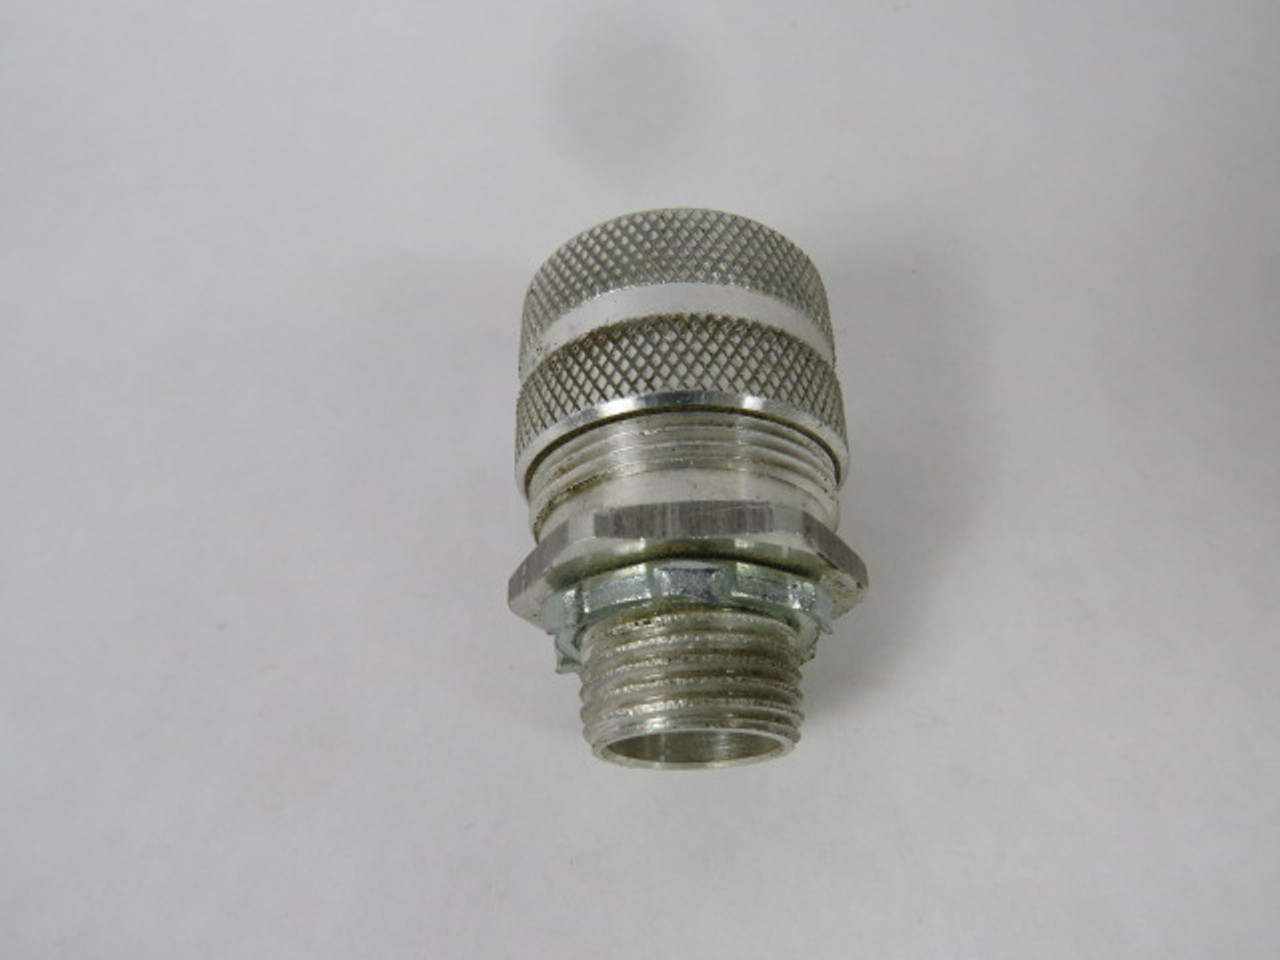 Hubbell SHC1027 1/2"NPT Cord Connector Aluminum USED